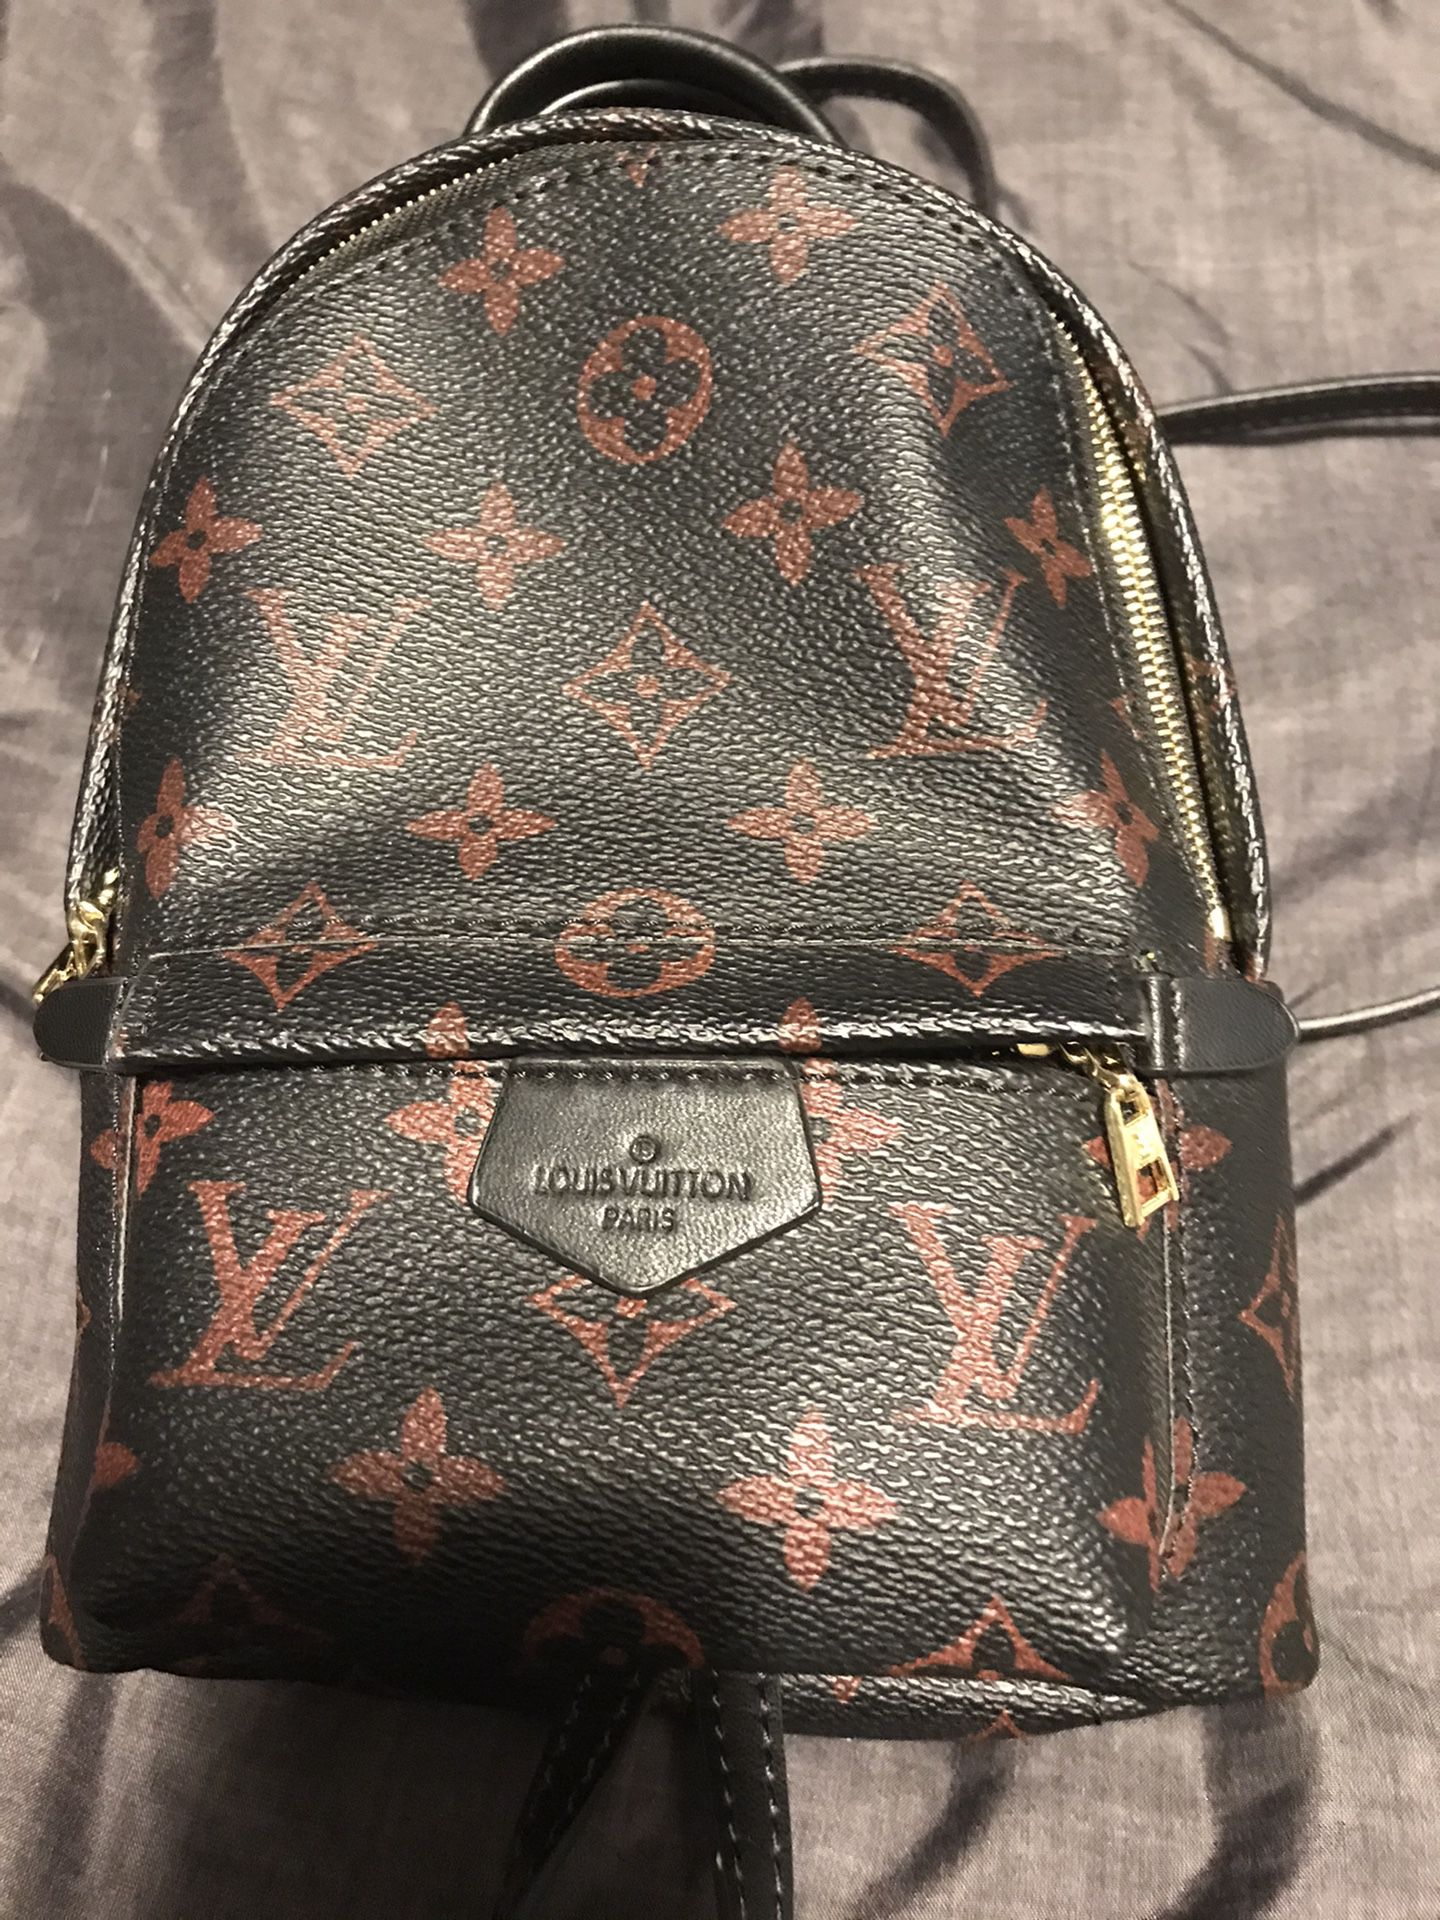 Louis Vuitton Palm Springs PM Backpack for Sale in Irving, TX